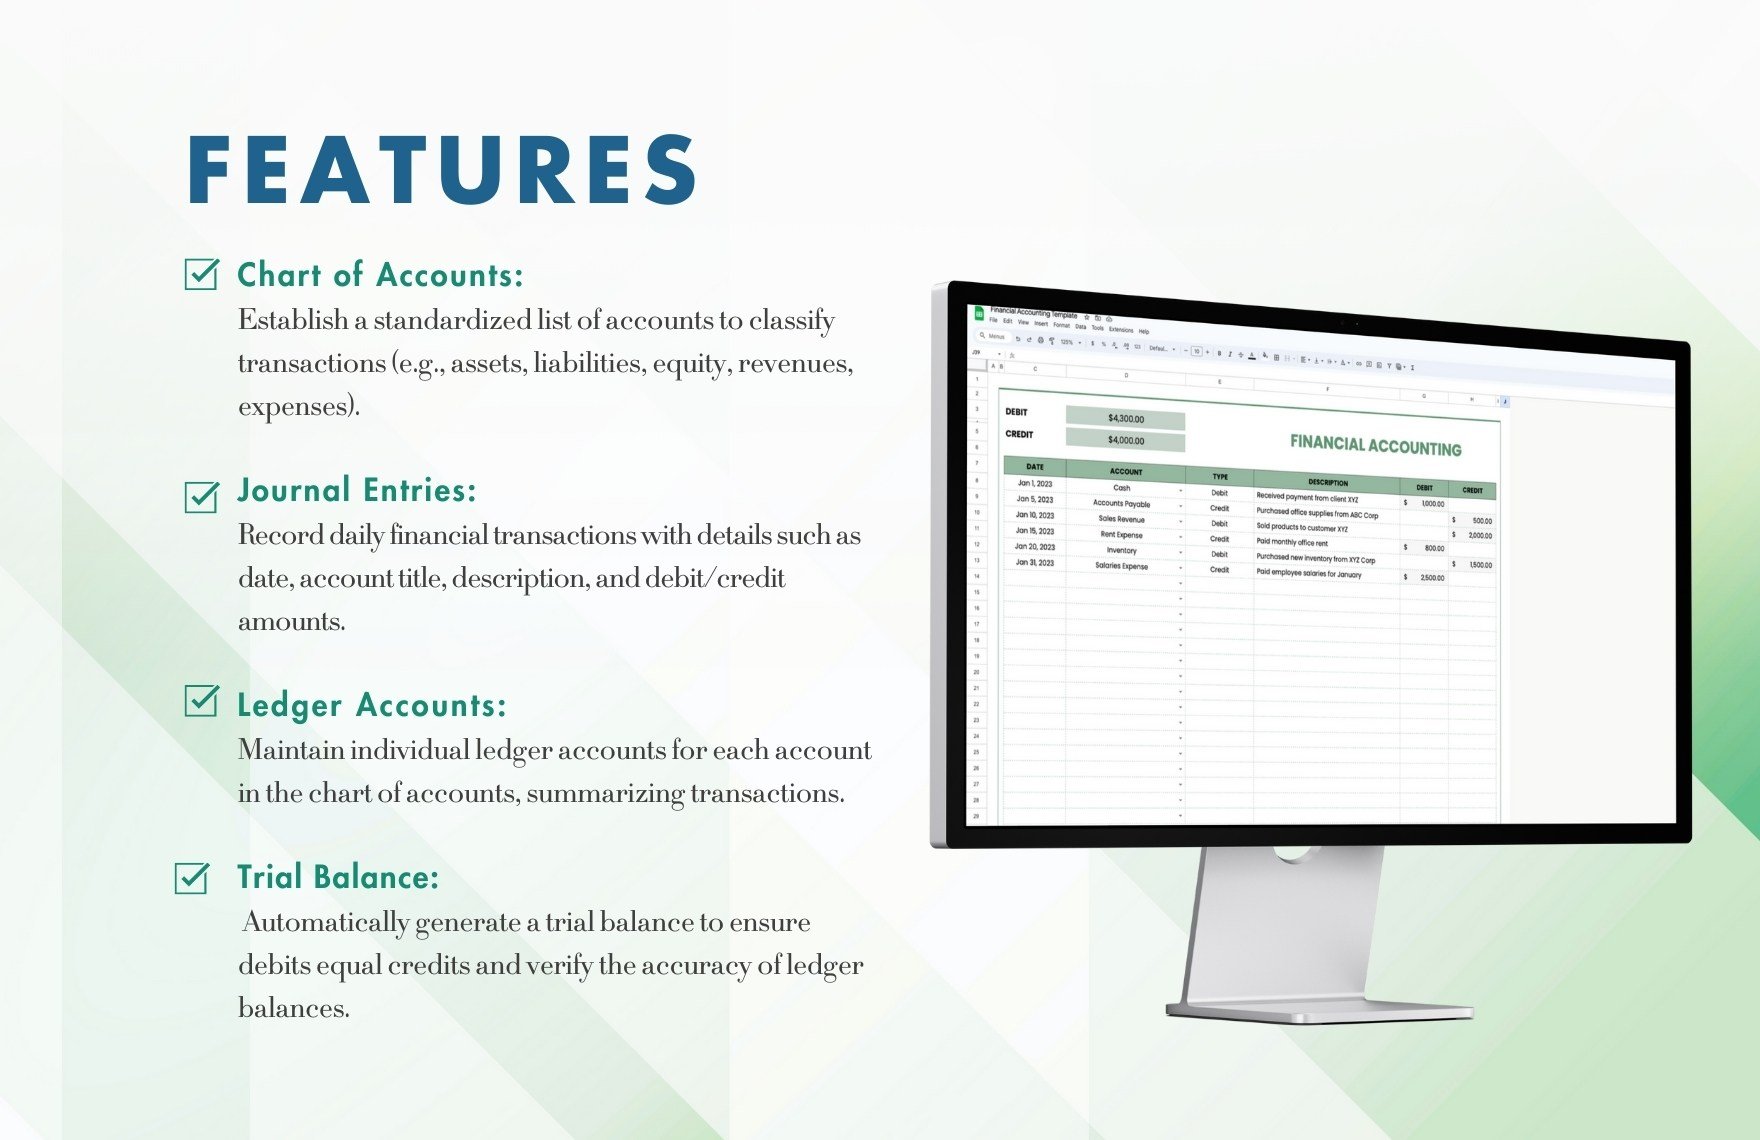 Financial Accounting Template